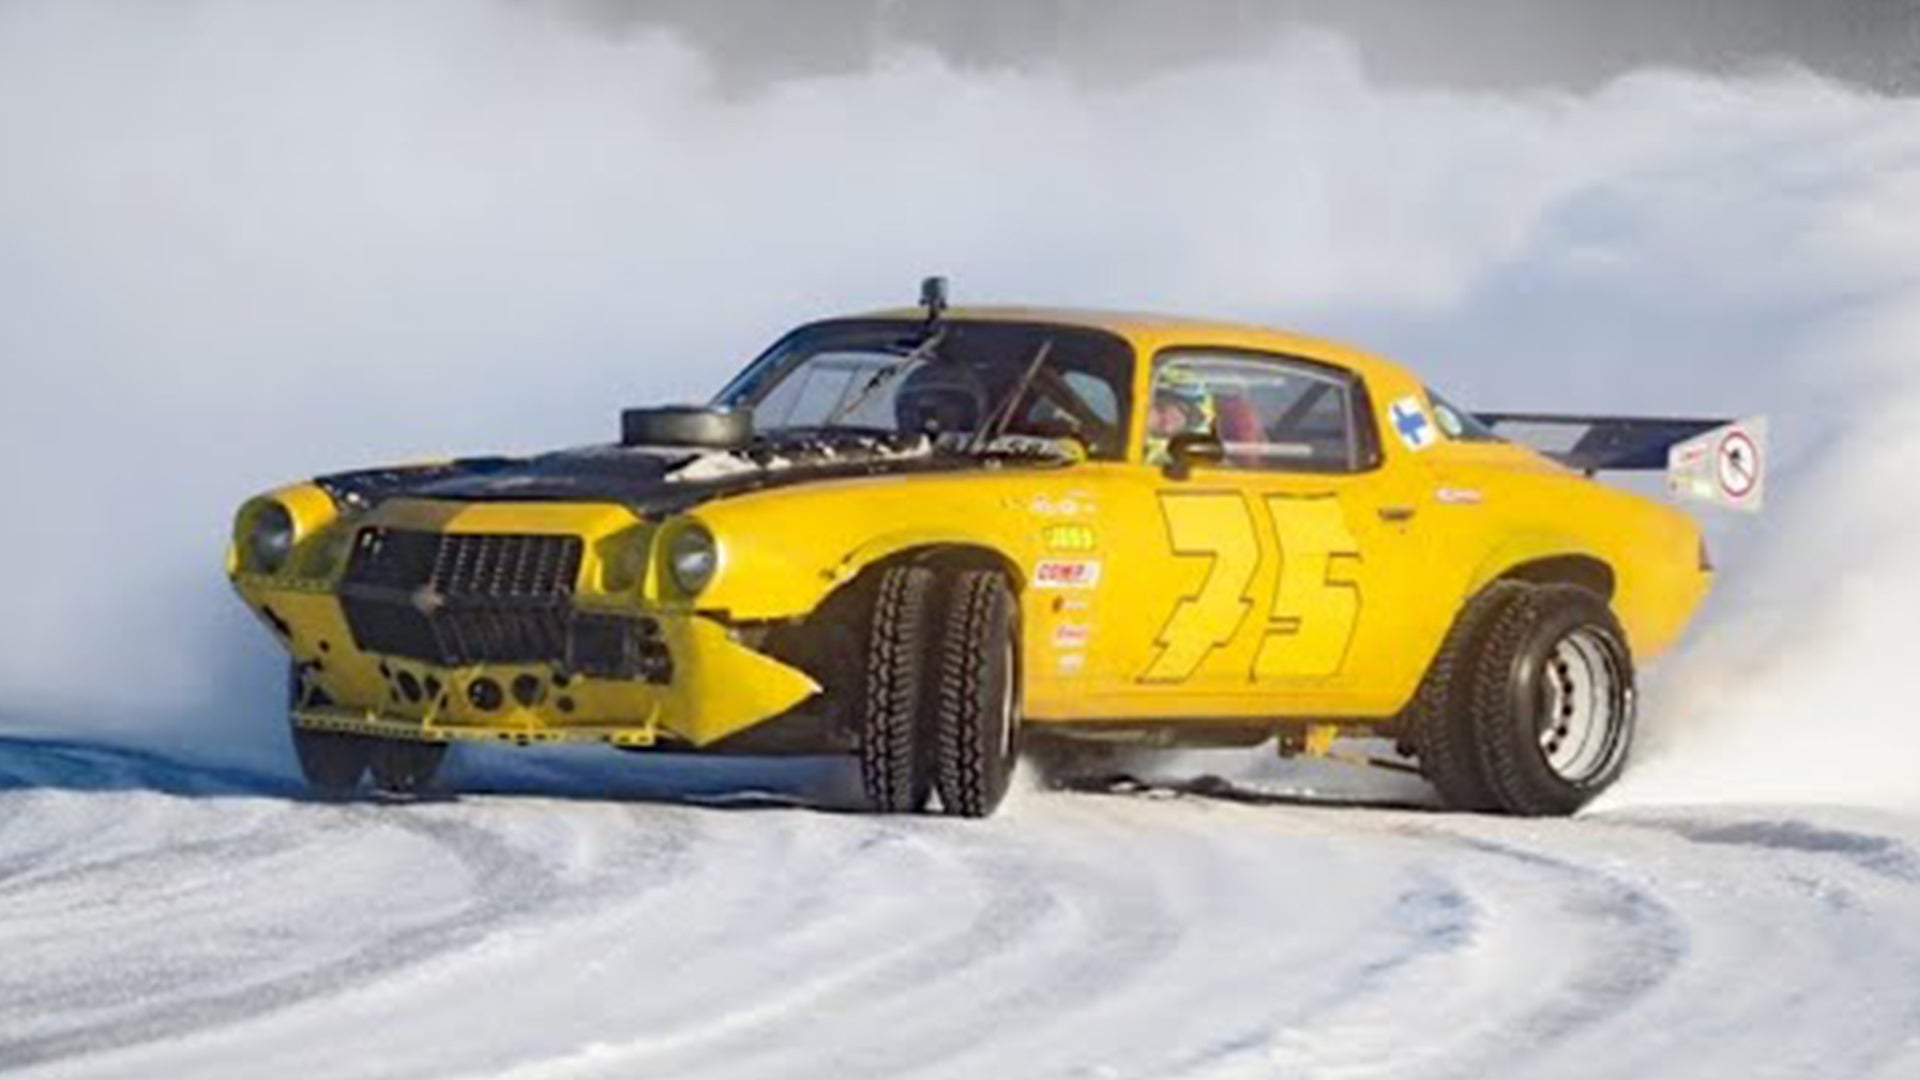 Big-Block Chevrolet Camaro Shatters Ice Racing Records with Double Dually Studded Tires